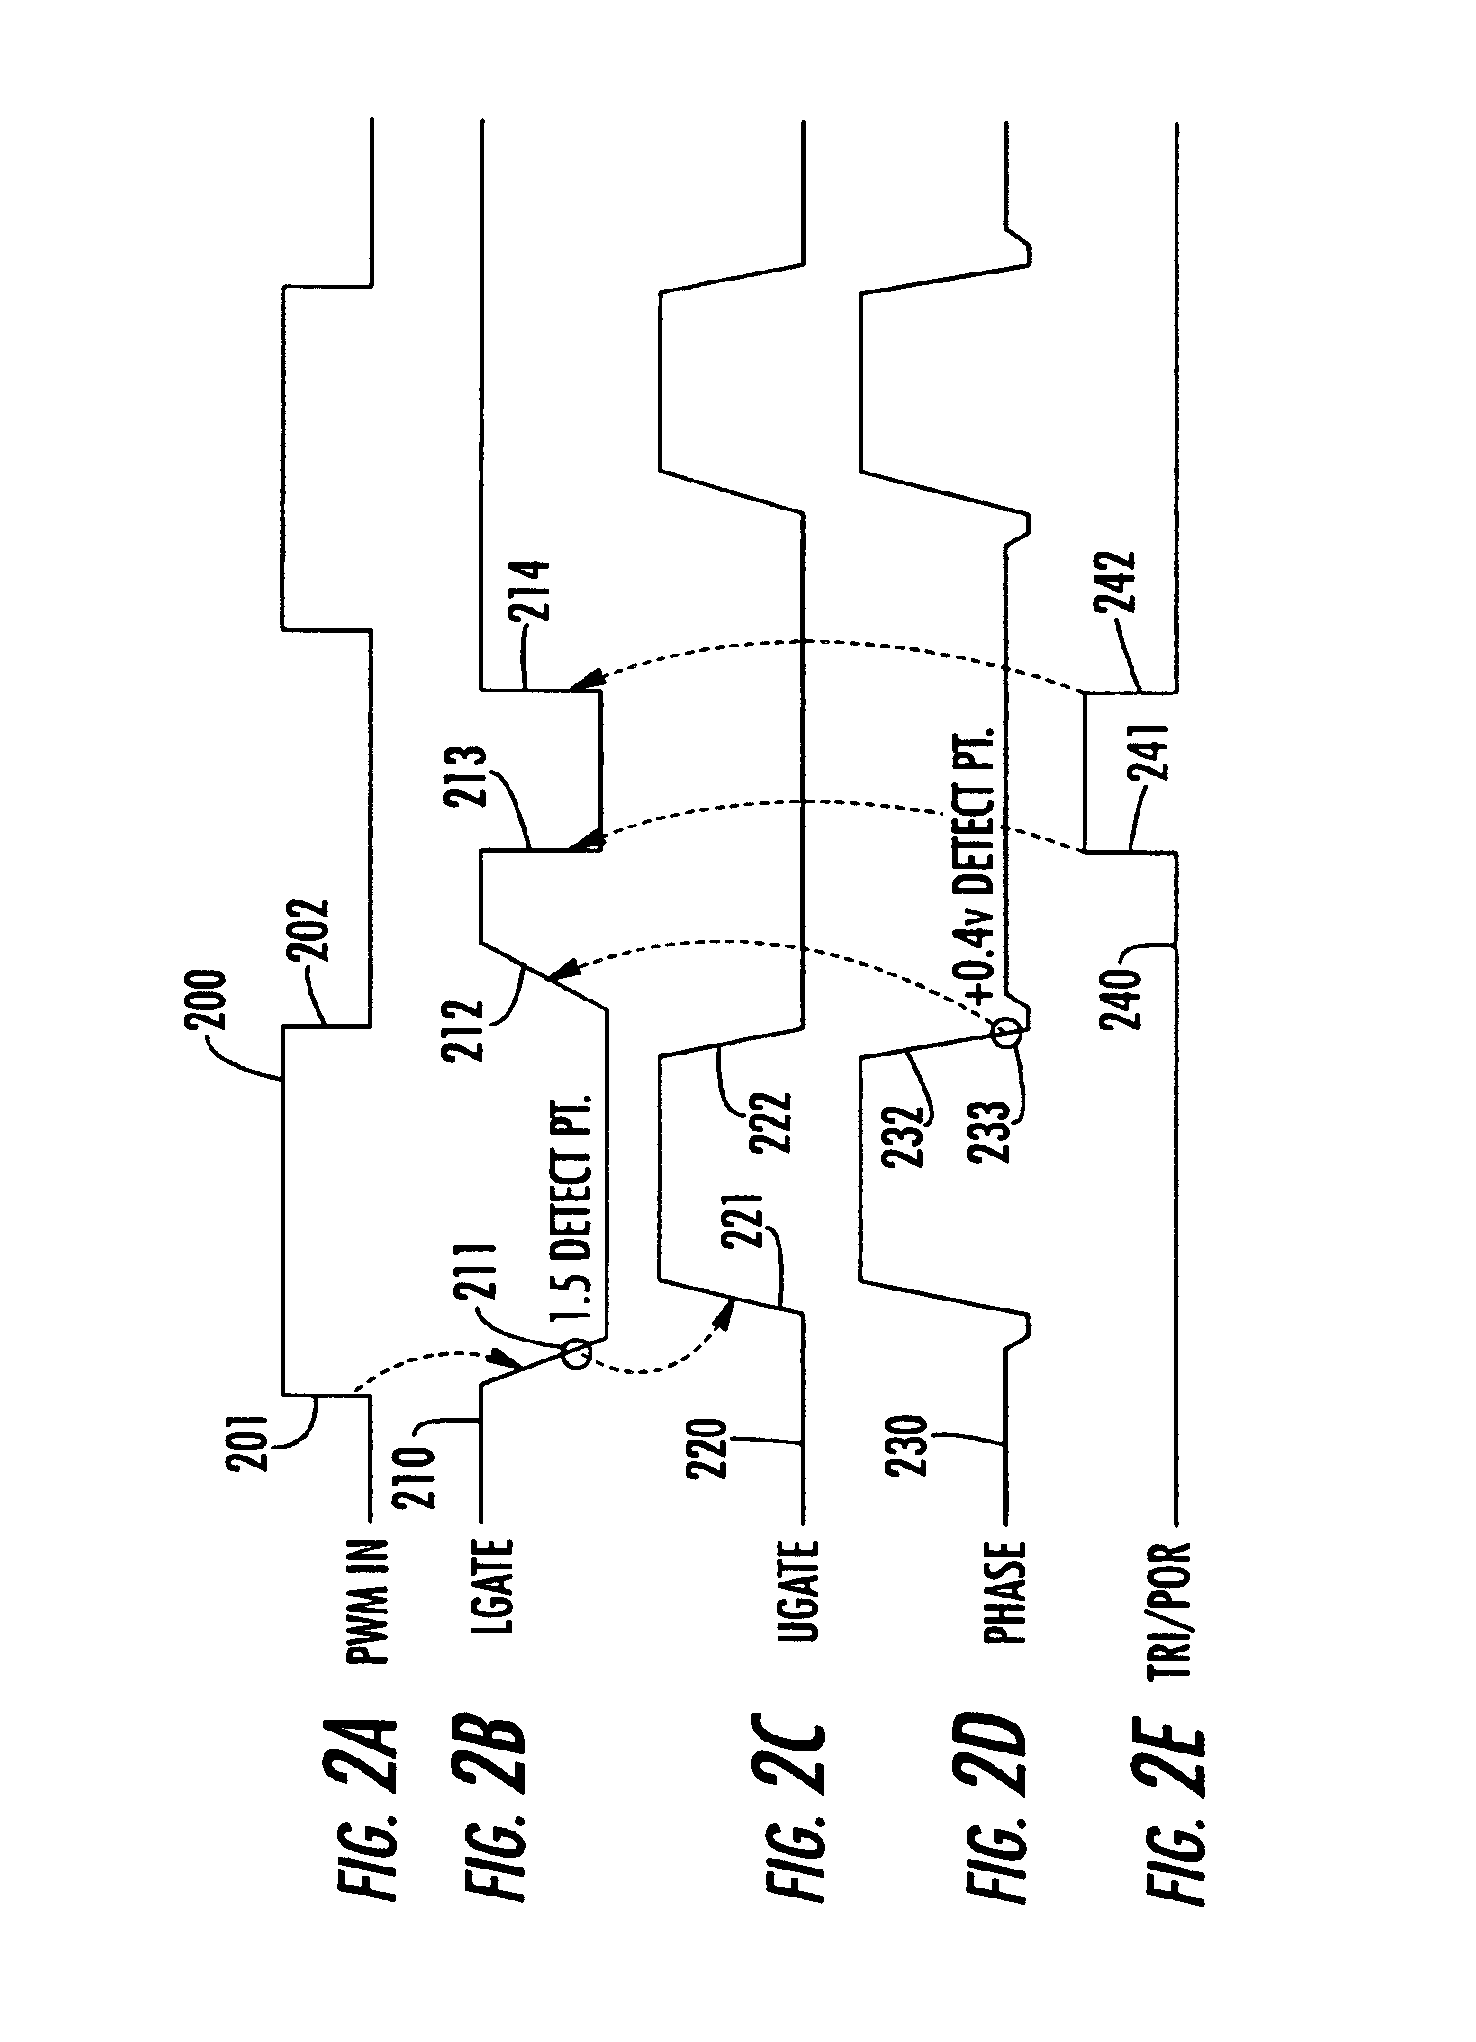 PWM-based DC-DC converter with assured dead time control exhibiting no shoot-through current and independent of type of FET used